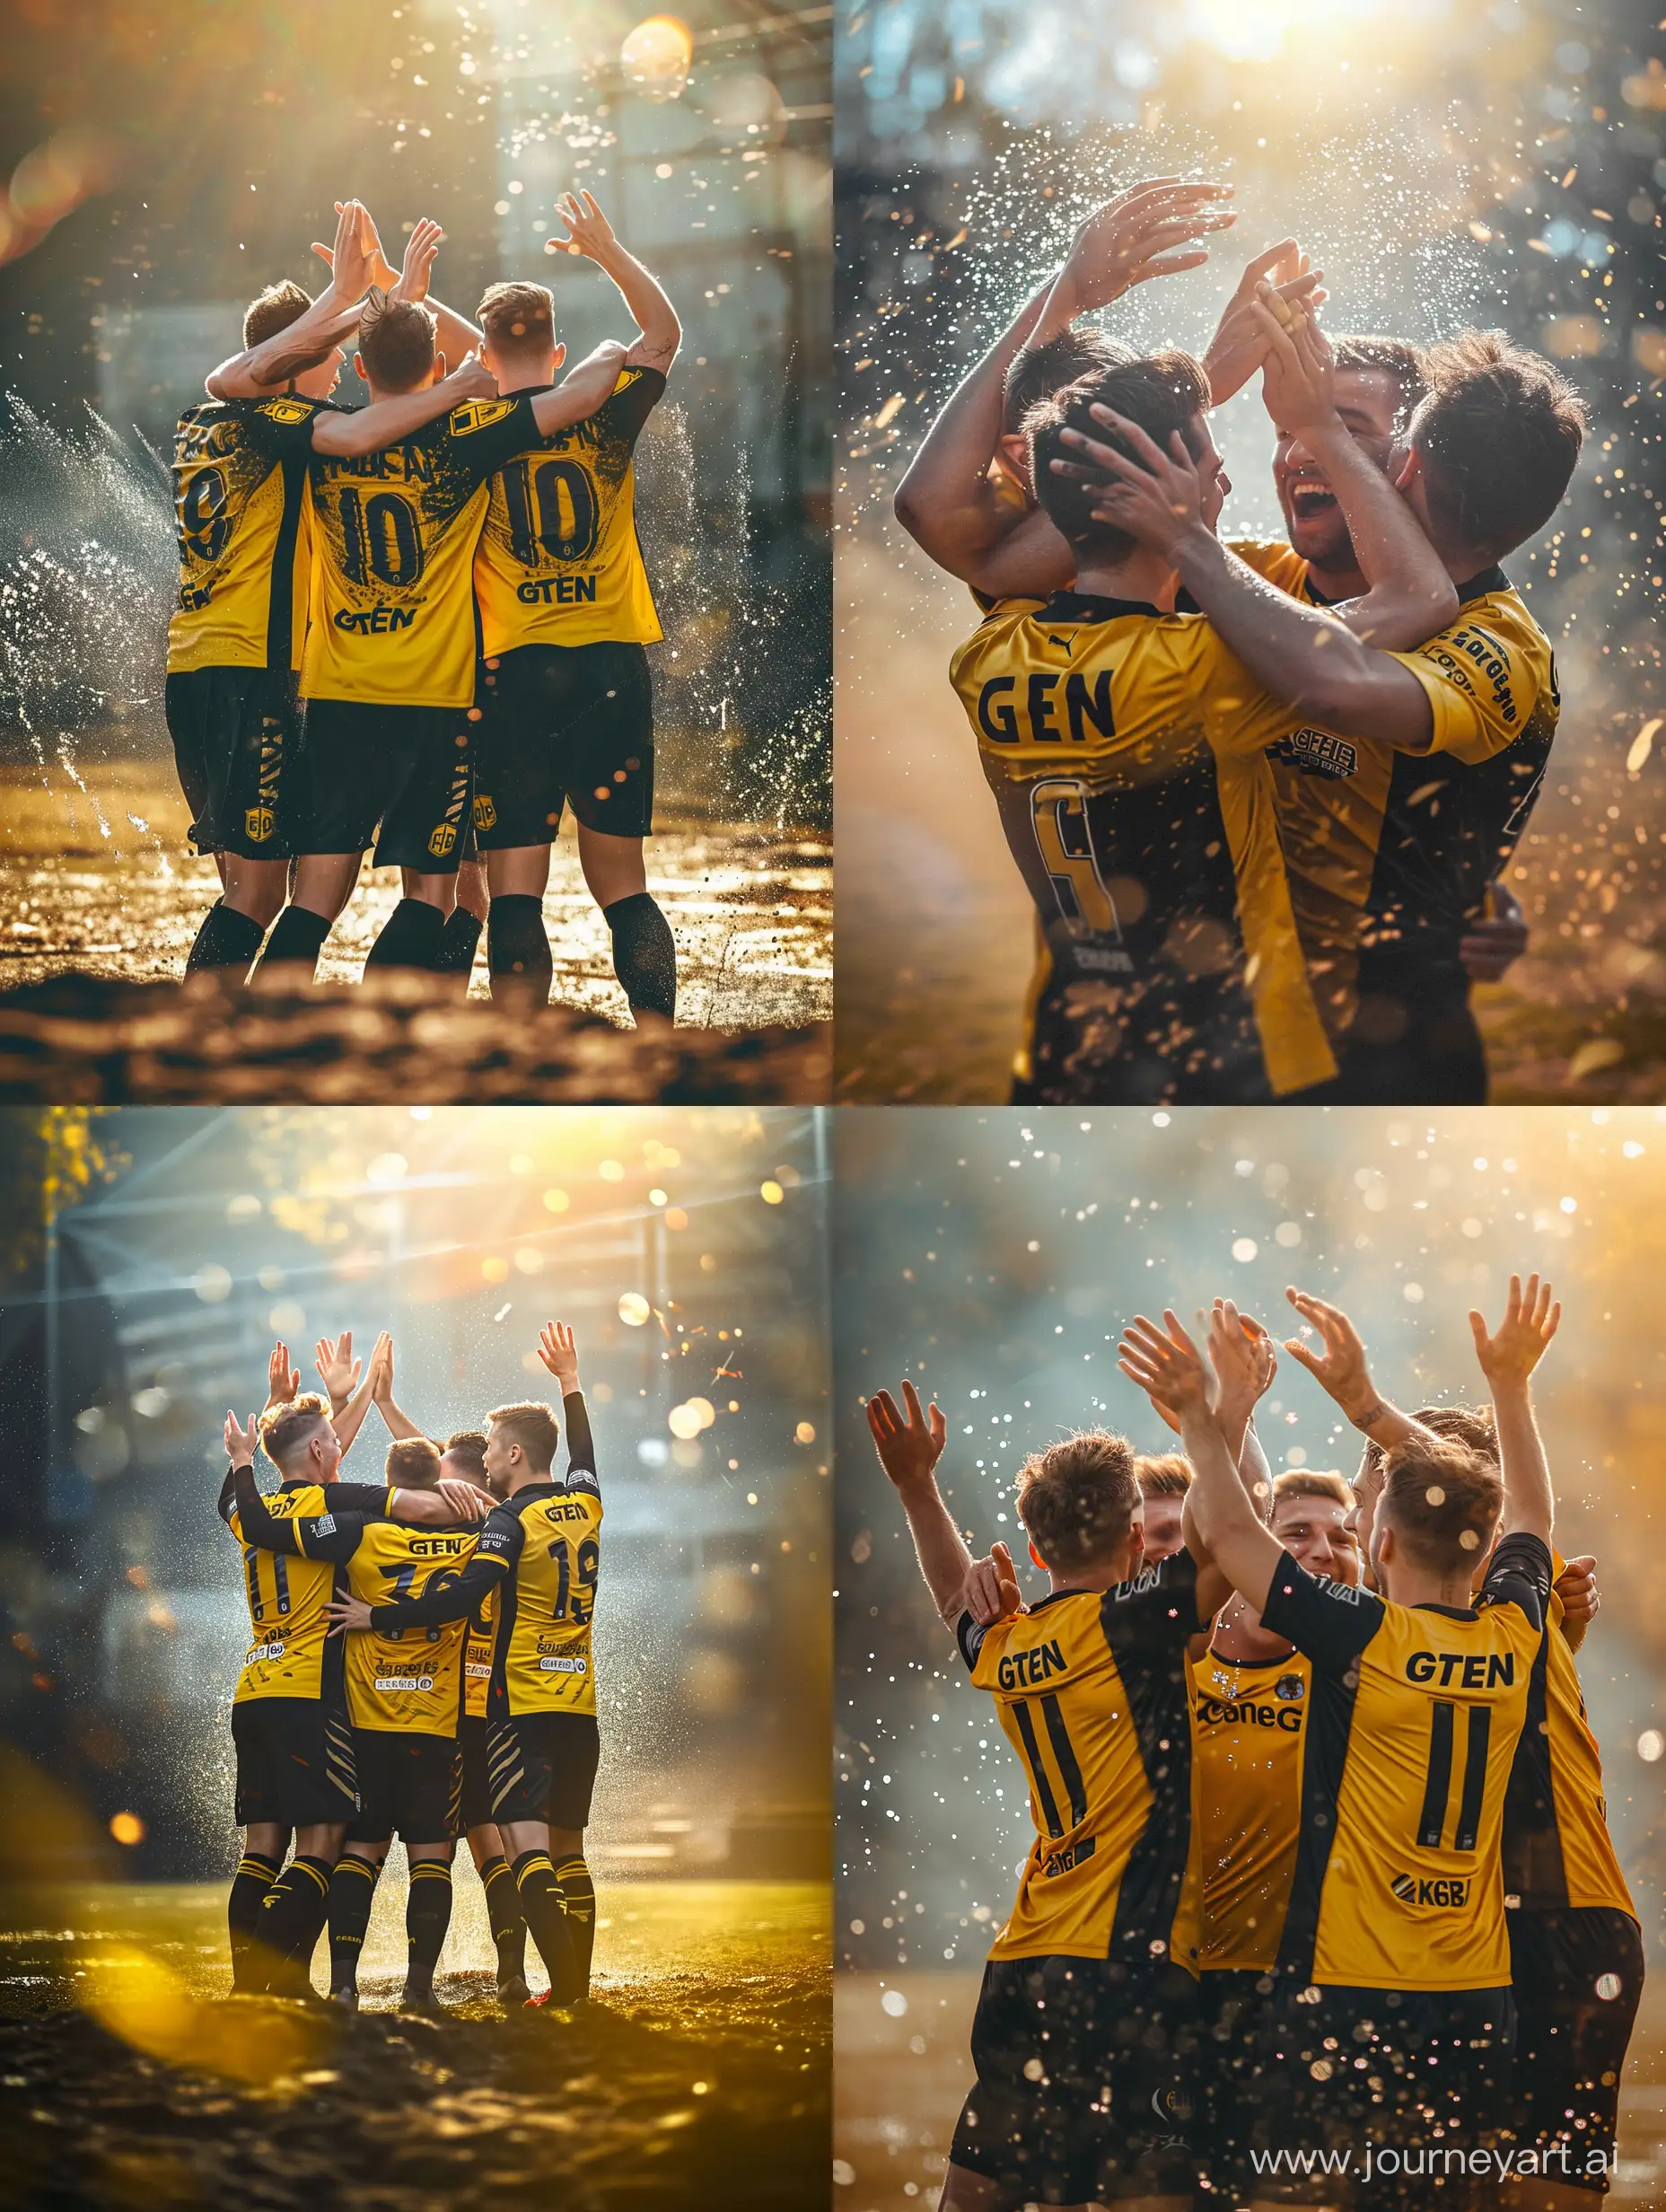 Ultra realistic,4 soccer players do a goal celebration. hug while raising hands. yellow and black jersey. there is 'GTEN' written on the jersey. on the syntactic field. there is a little splash of water. war background. refraction of sunlight. canon eos-id x mark iii dslr --v 6.0